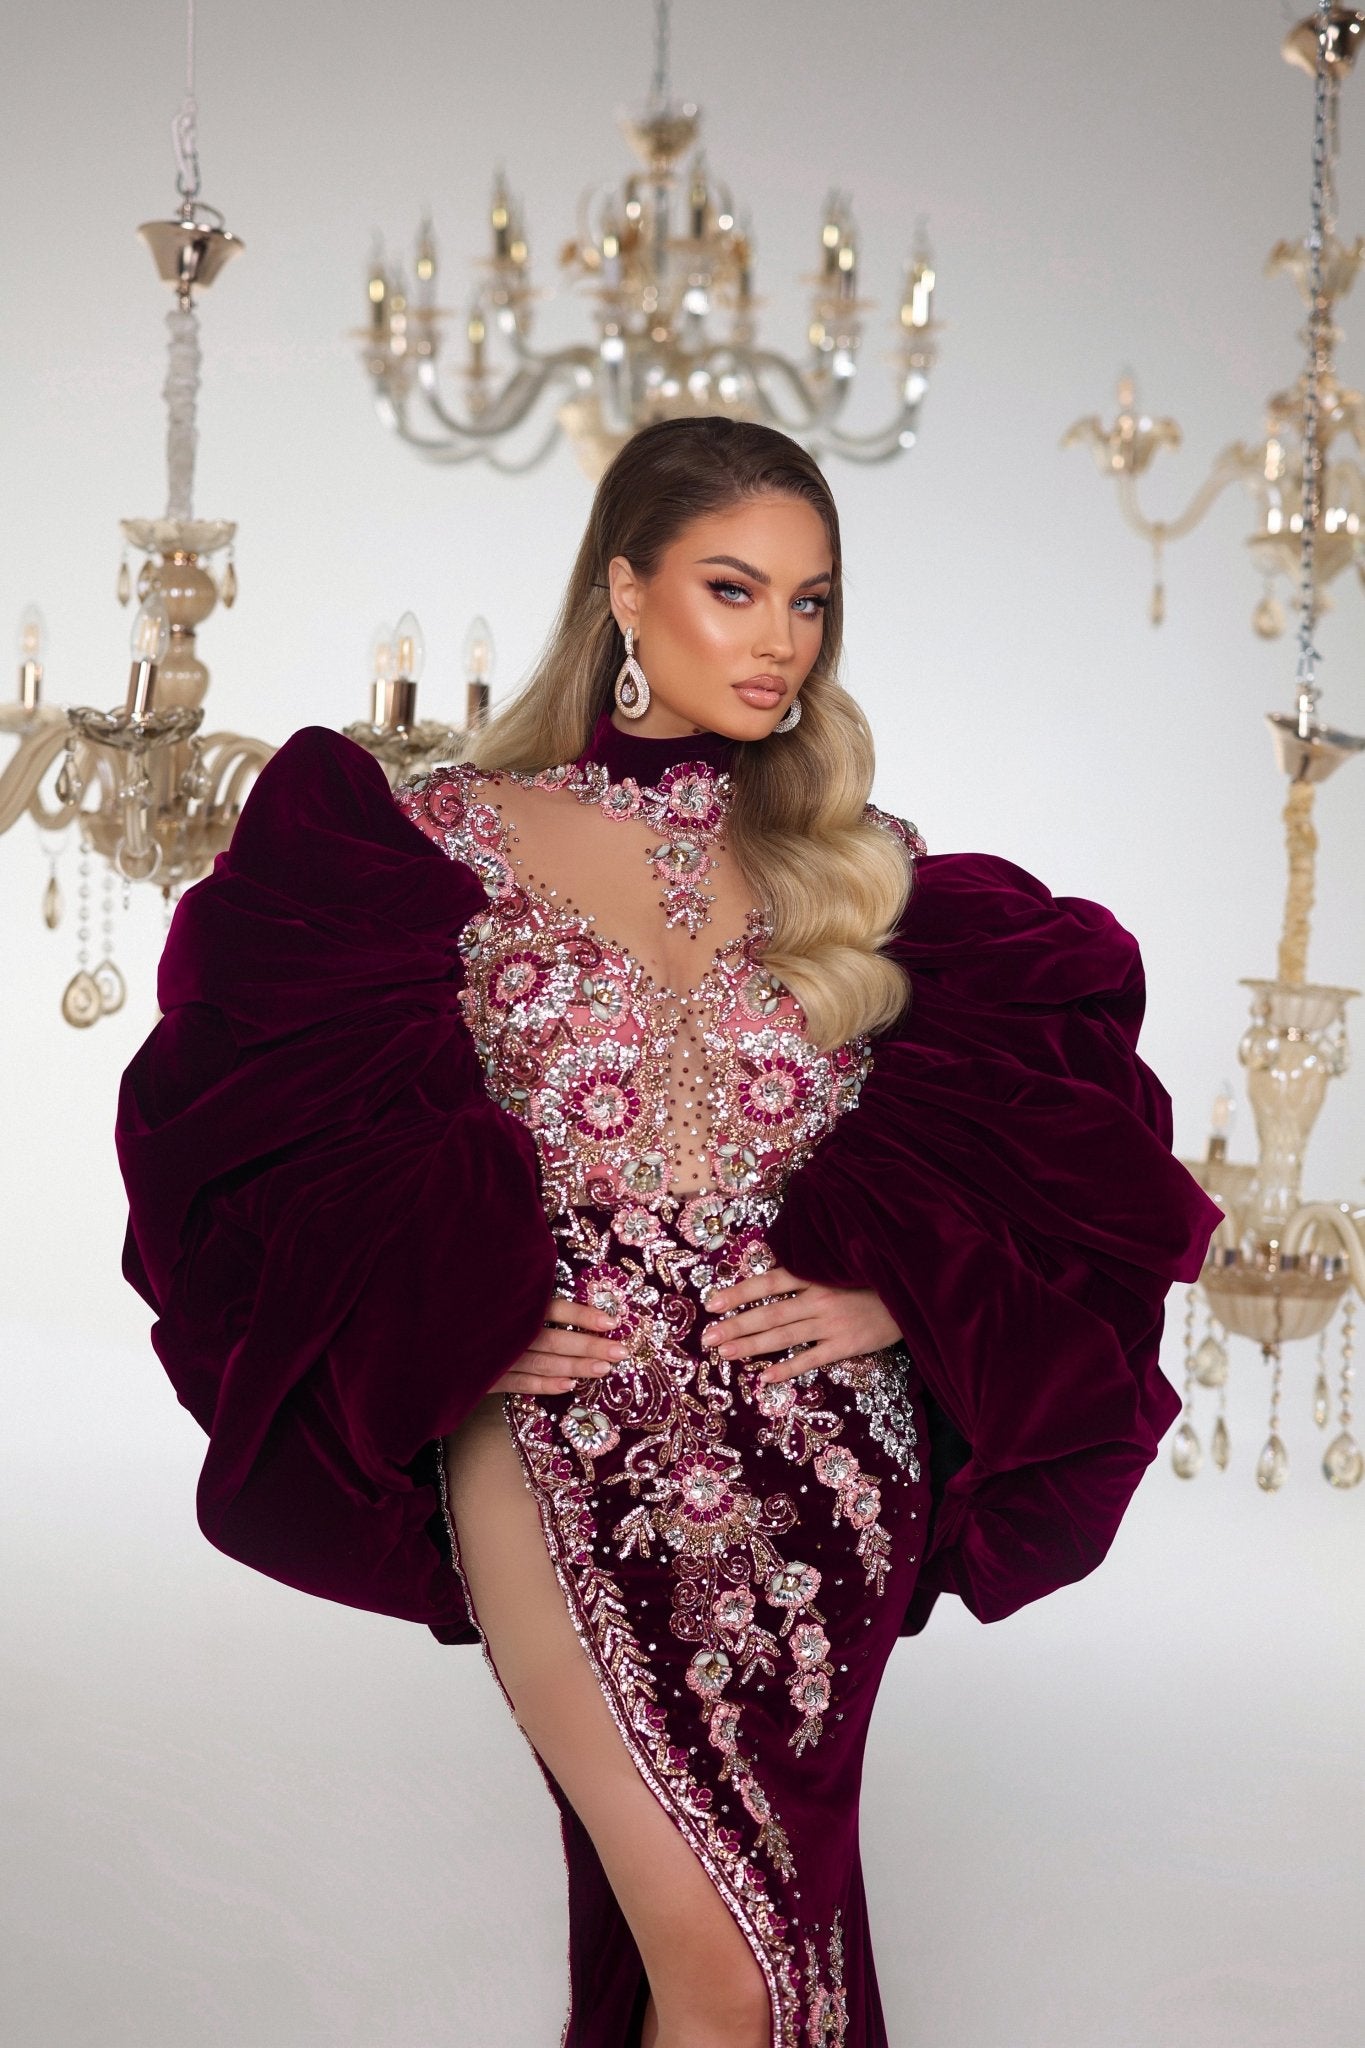 Burgundy Velvet Fitted Red Prom Dress With V Neck, Long Sleeves, And Ankle  Length Hemline For Black Girls Plus Size, White Lace Appliques, Formal  Evening Gown BC14919 From Toysmall666, $111.66 | DHgate.Com